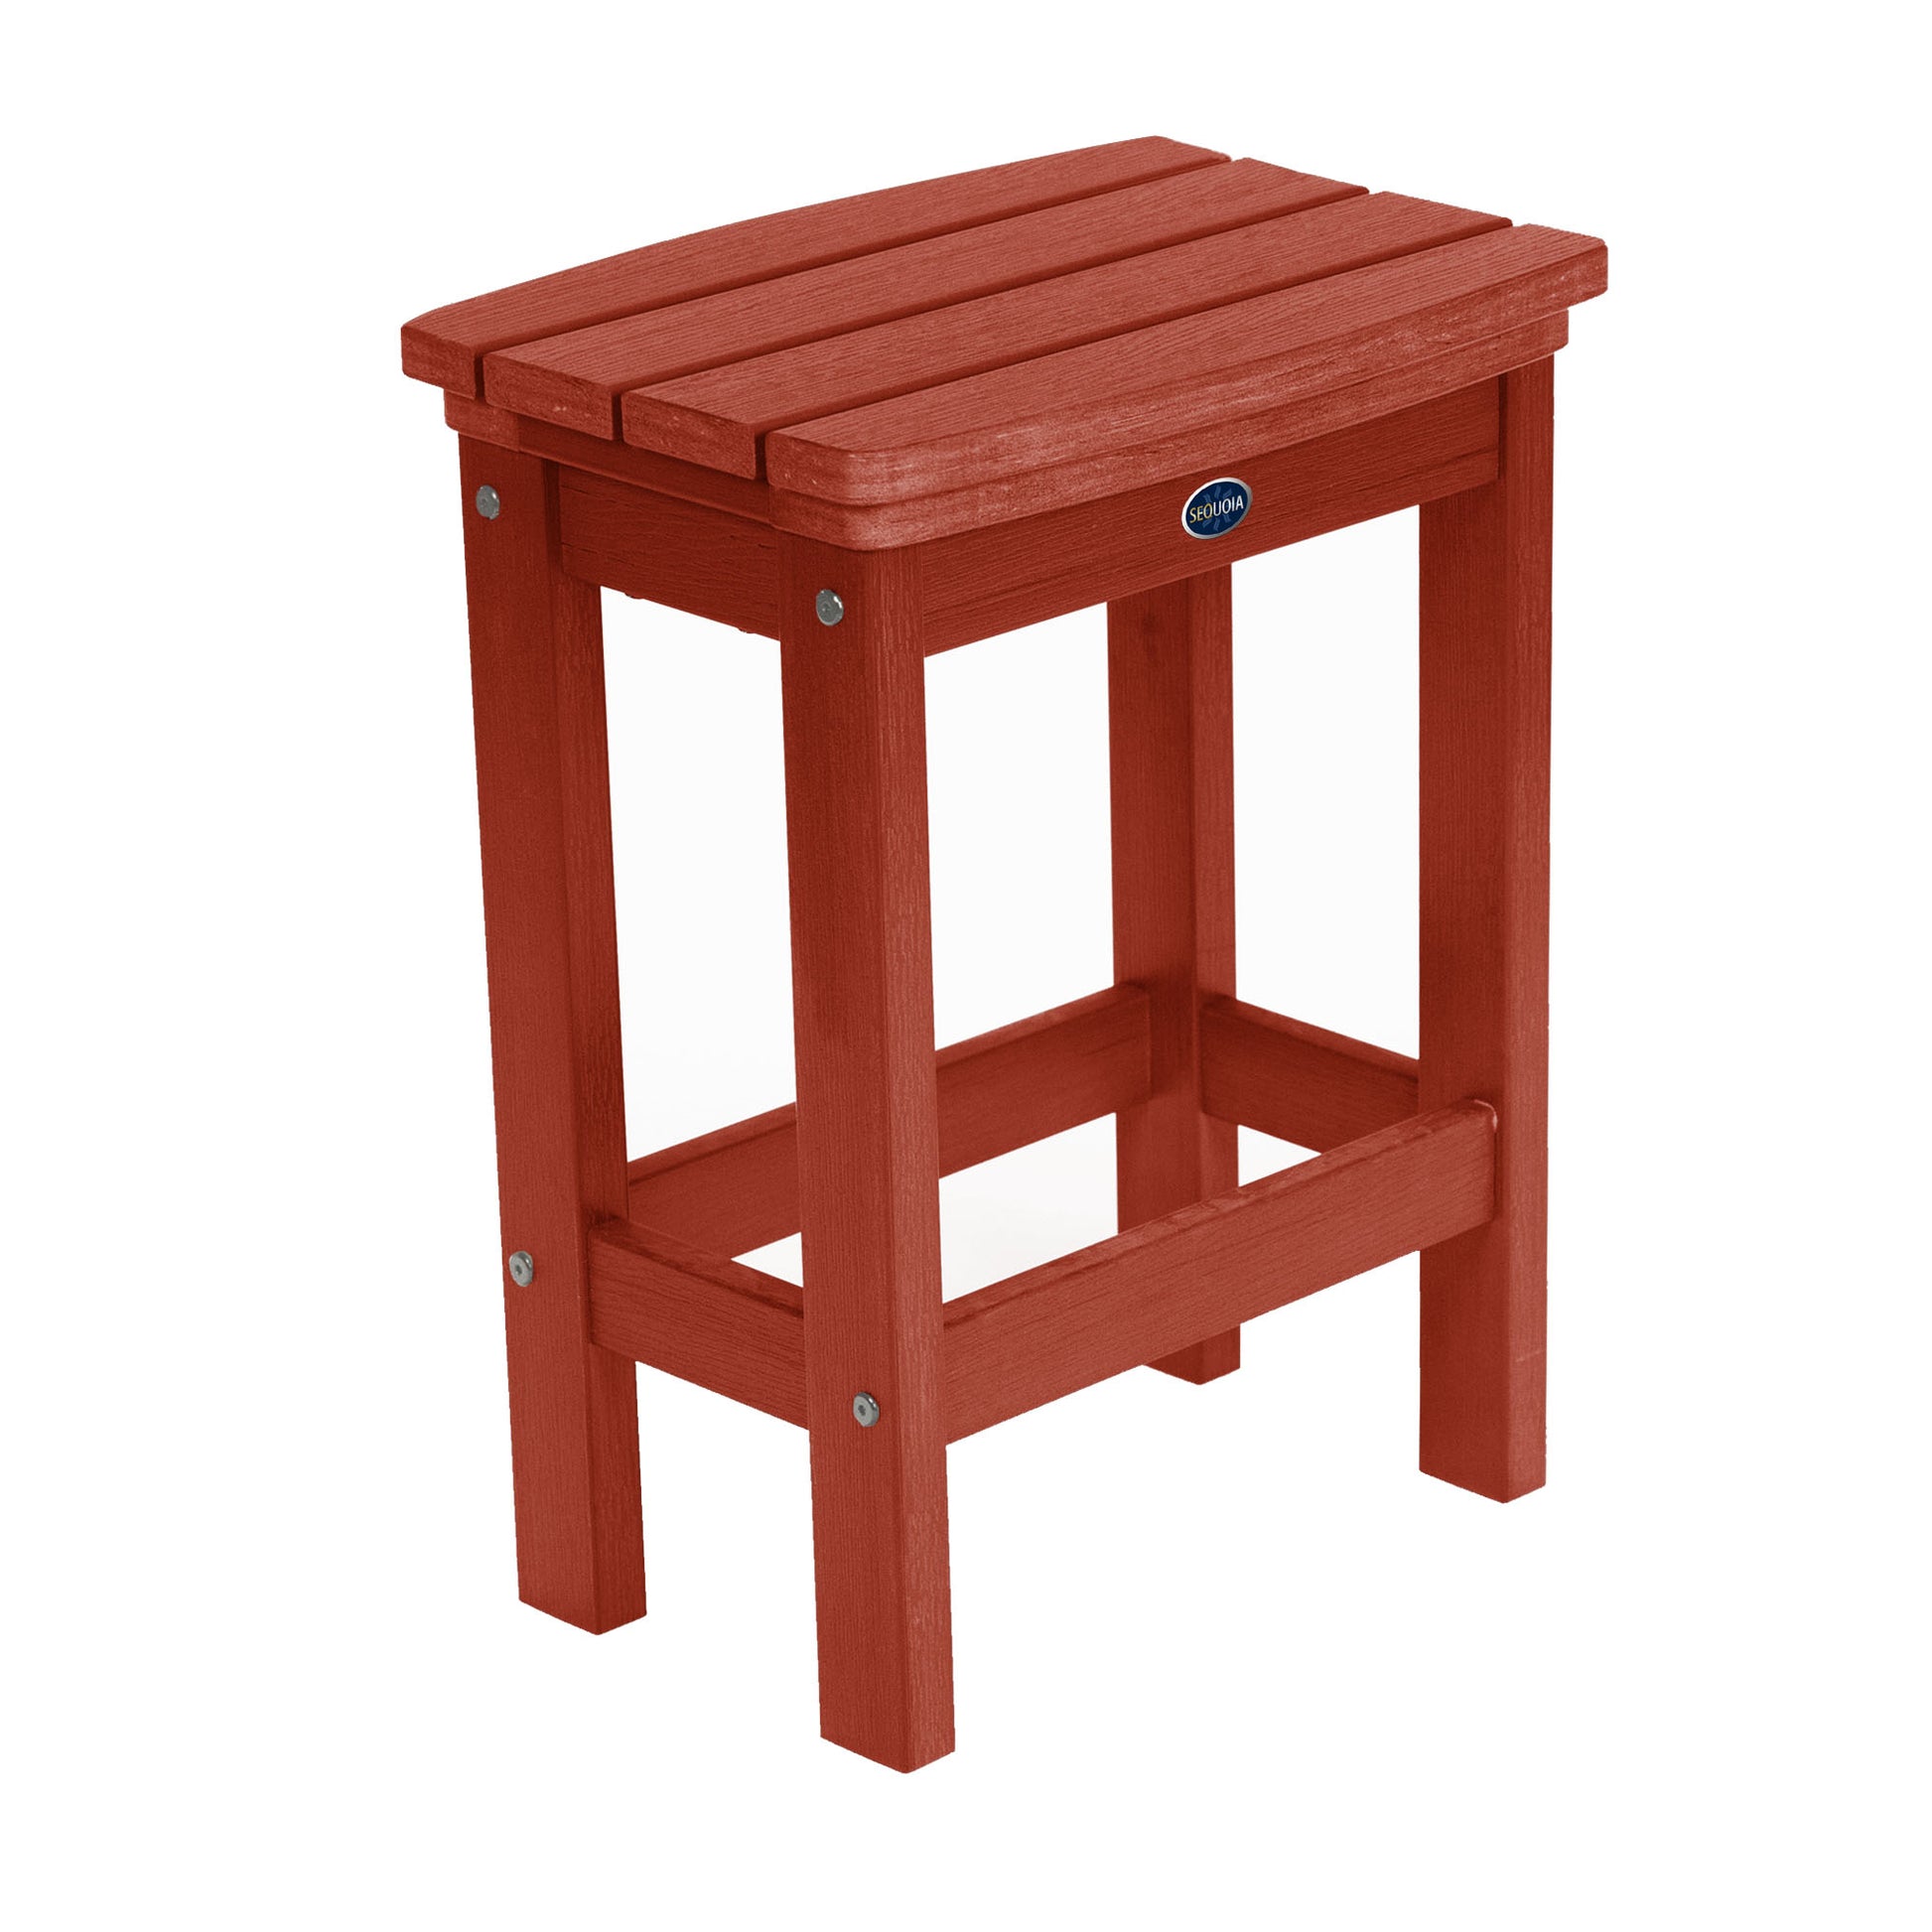 Blue Ridge counter height balcony stool in Rustic Red